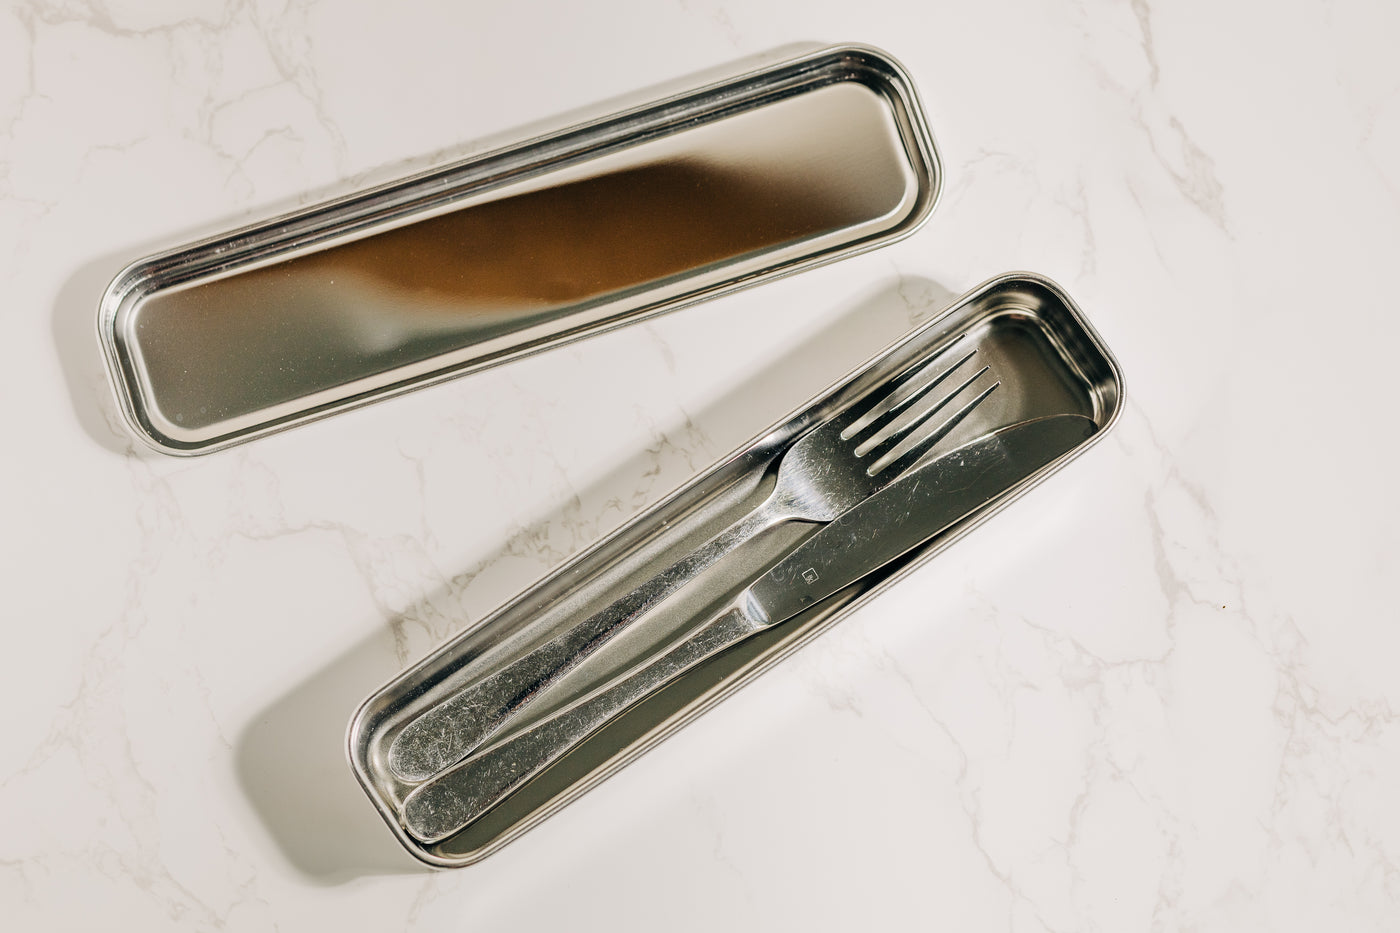 Stainless Steel Cutlery Holder / Toothbrush Travel Carry Case